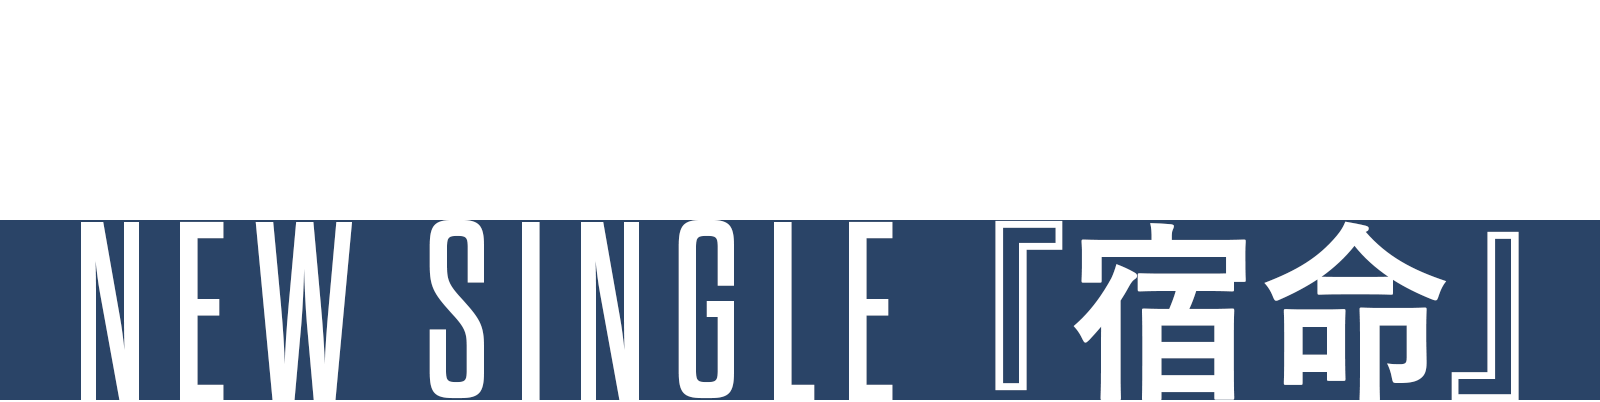 Official 髭 男 dism 宿命